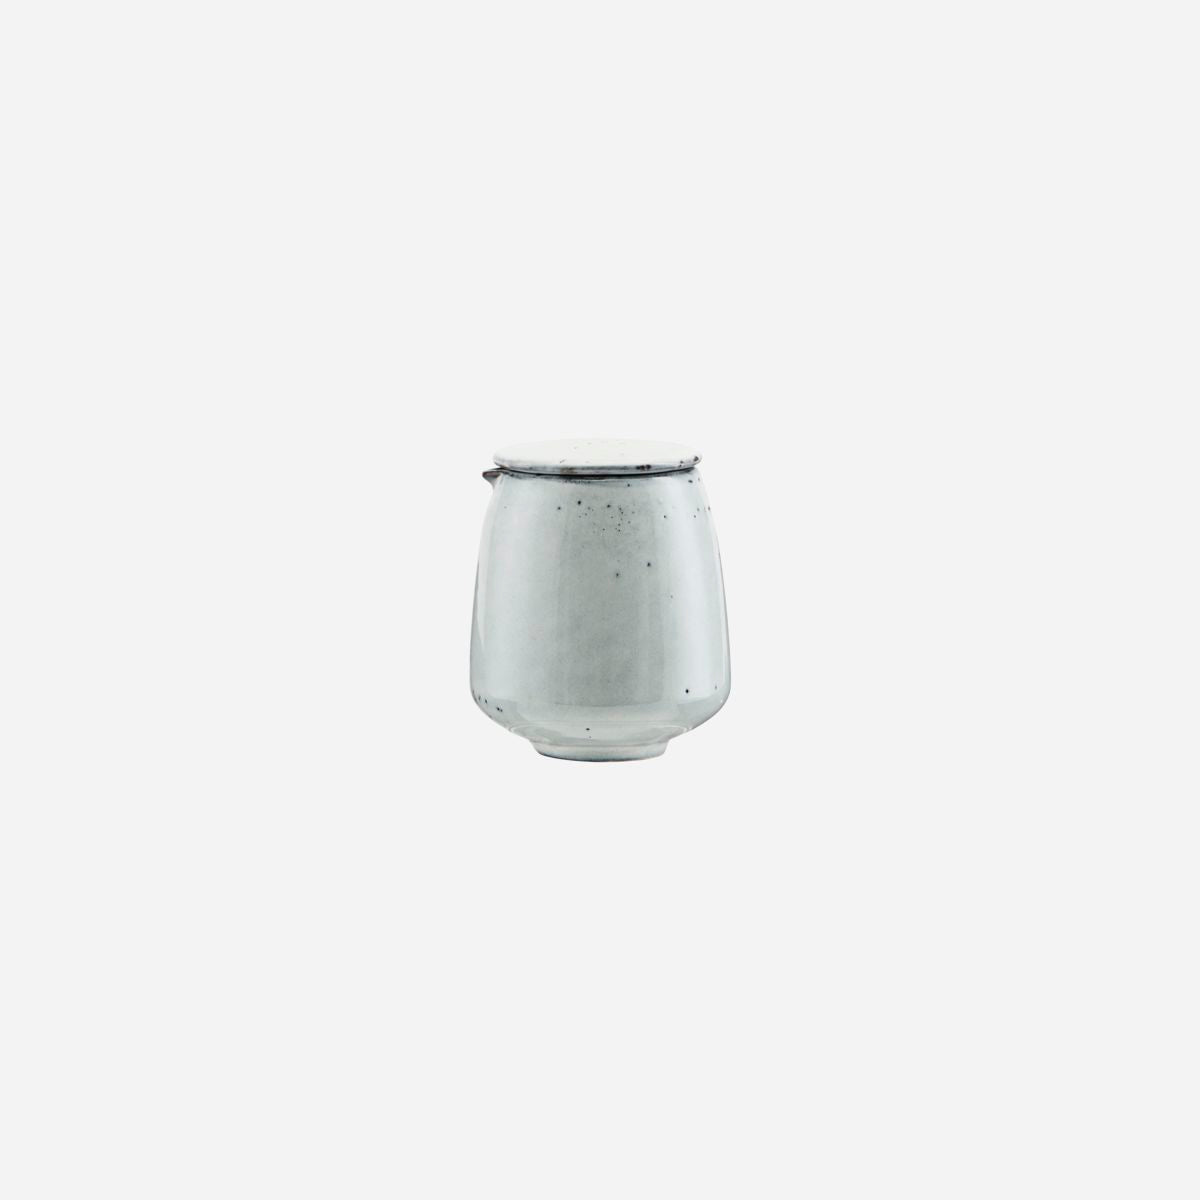 Soy Sauce Container Blue/Grey